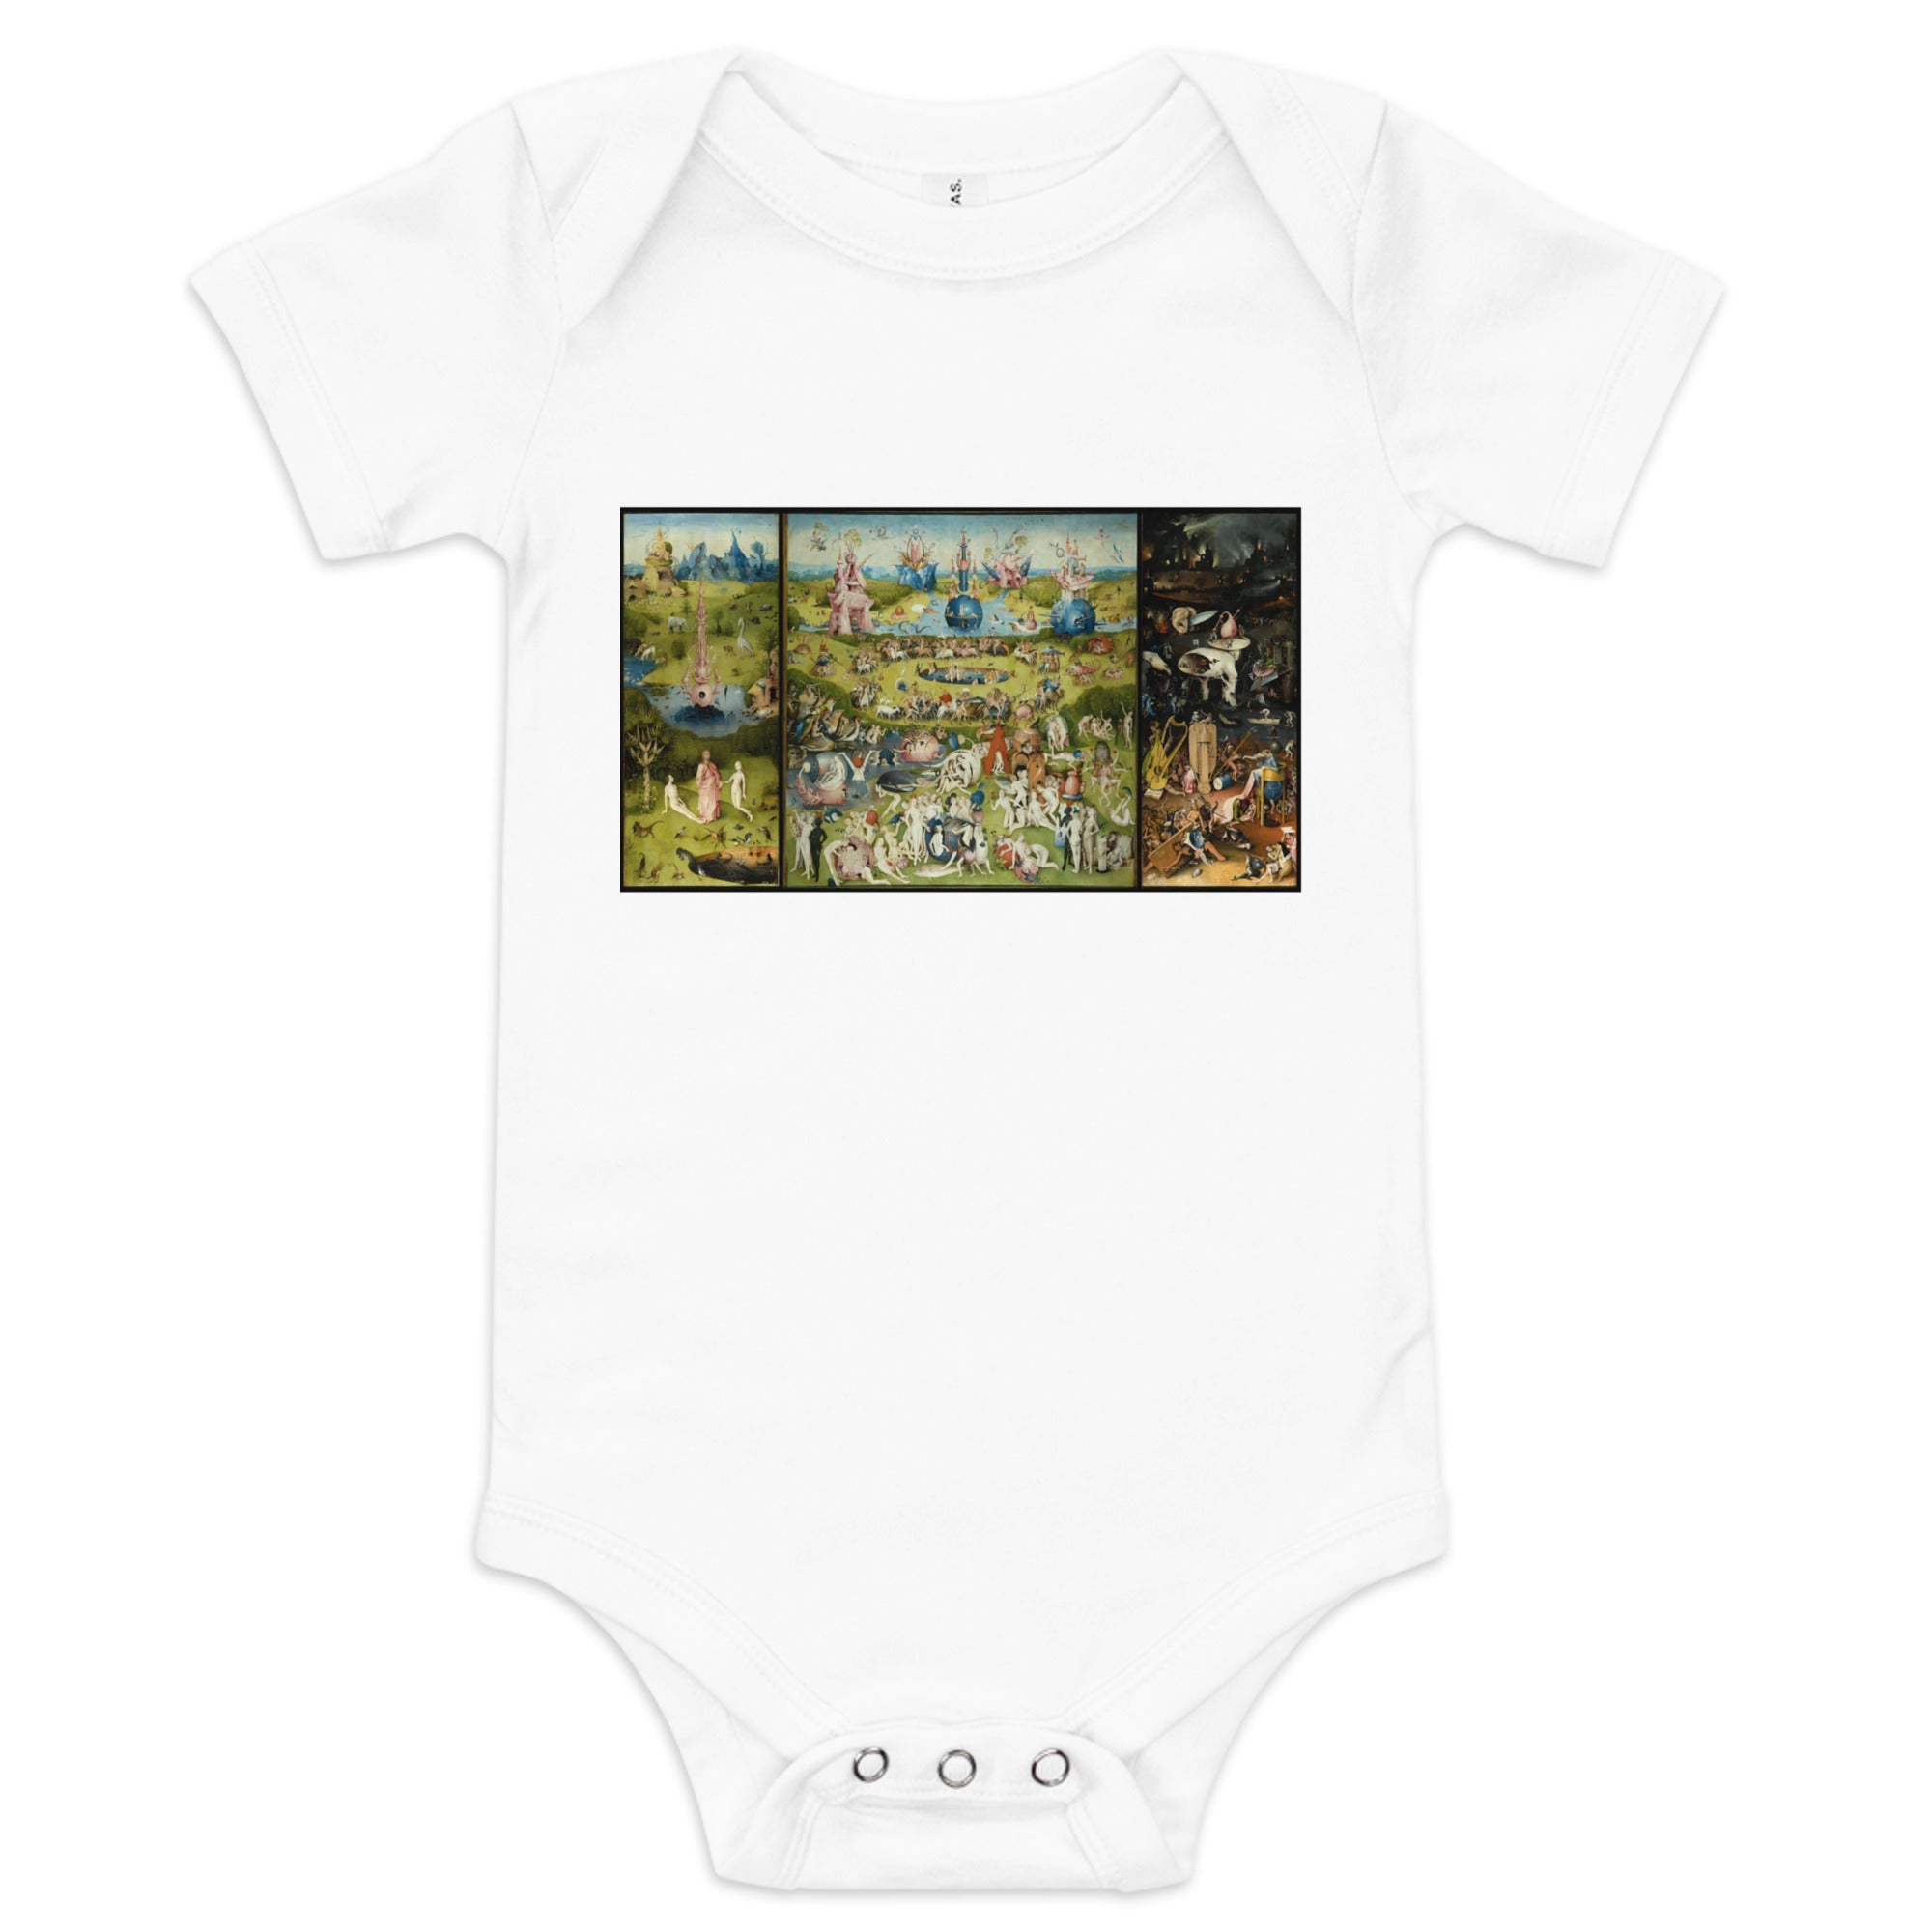 Hieronymus Bosch 'The Garden of Earthly Delights' Famous Painting Short Sleeve One Piece | Premium Baby Art One Sleeve